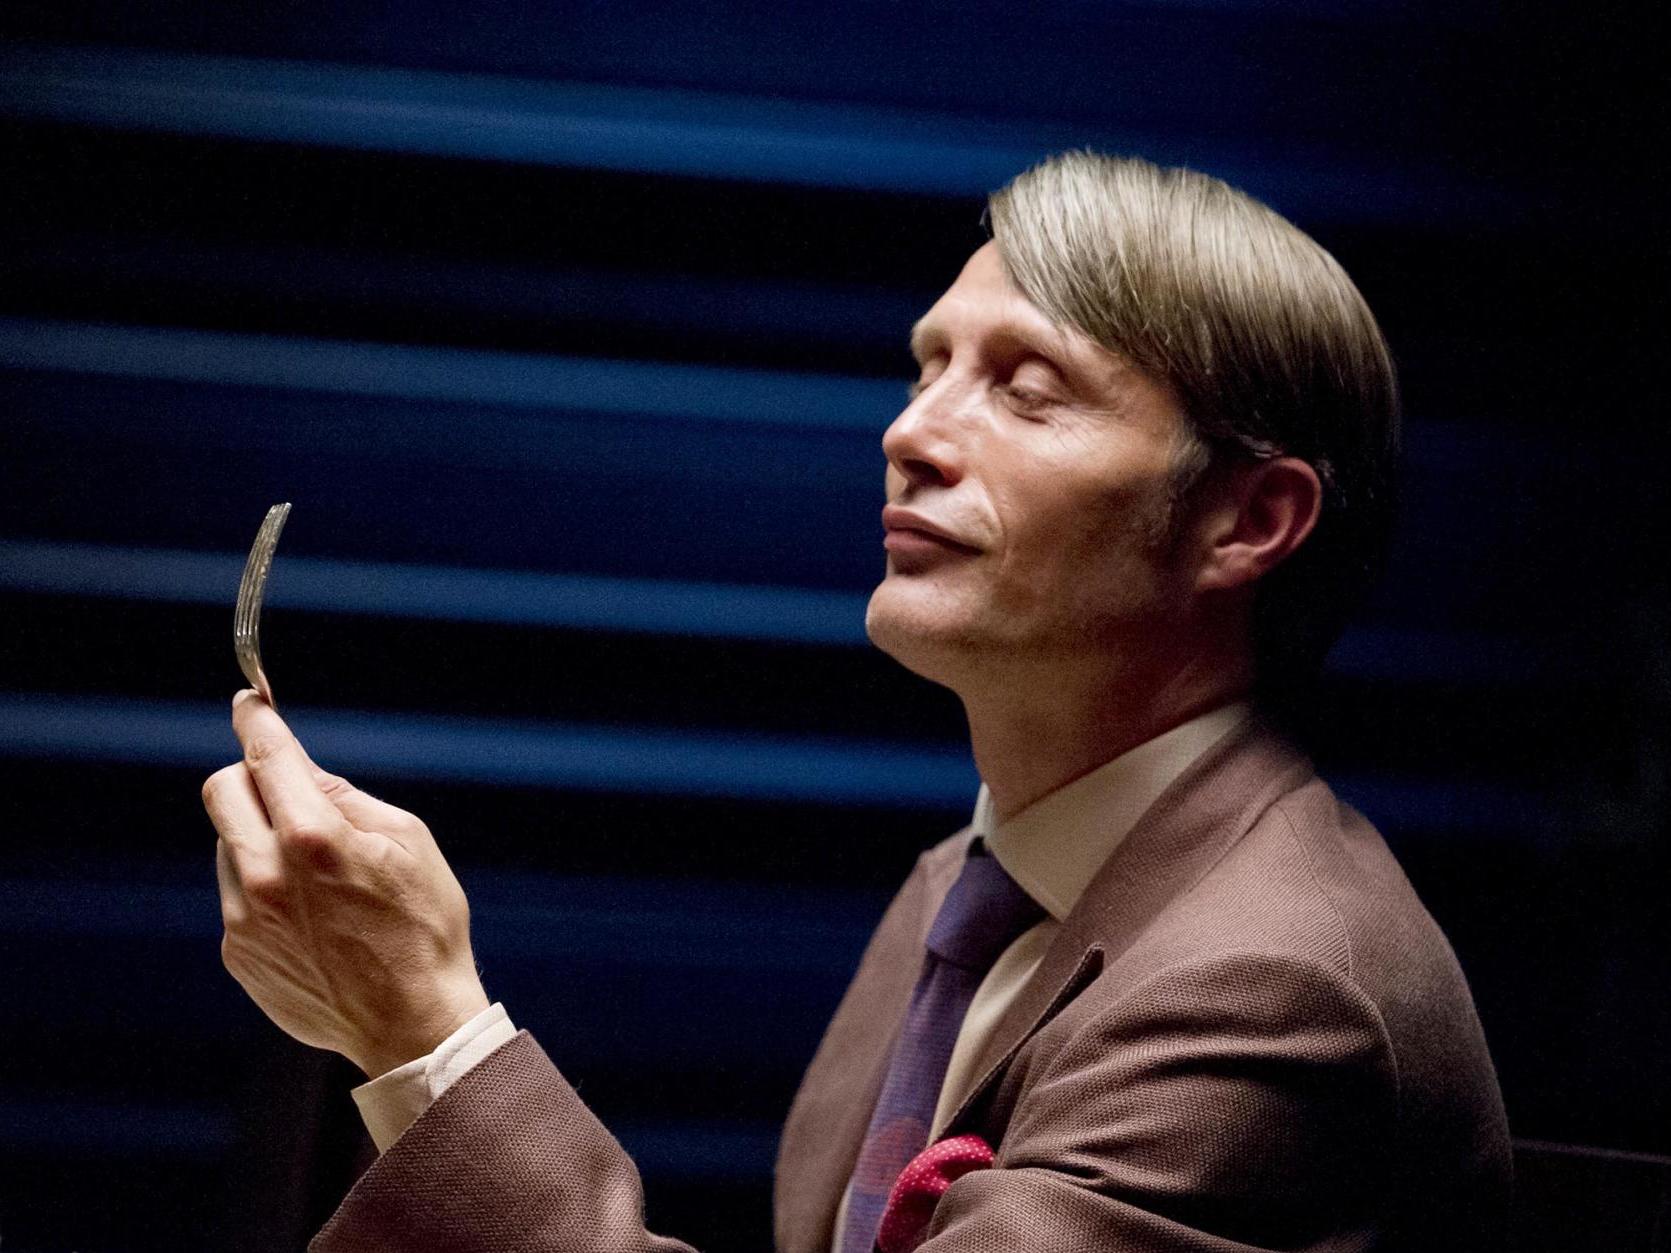 'Is Hannibal season 4 on the way?' Mads Mikkelsen teases fans as cult series arrives on Netflix